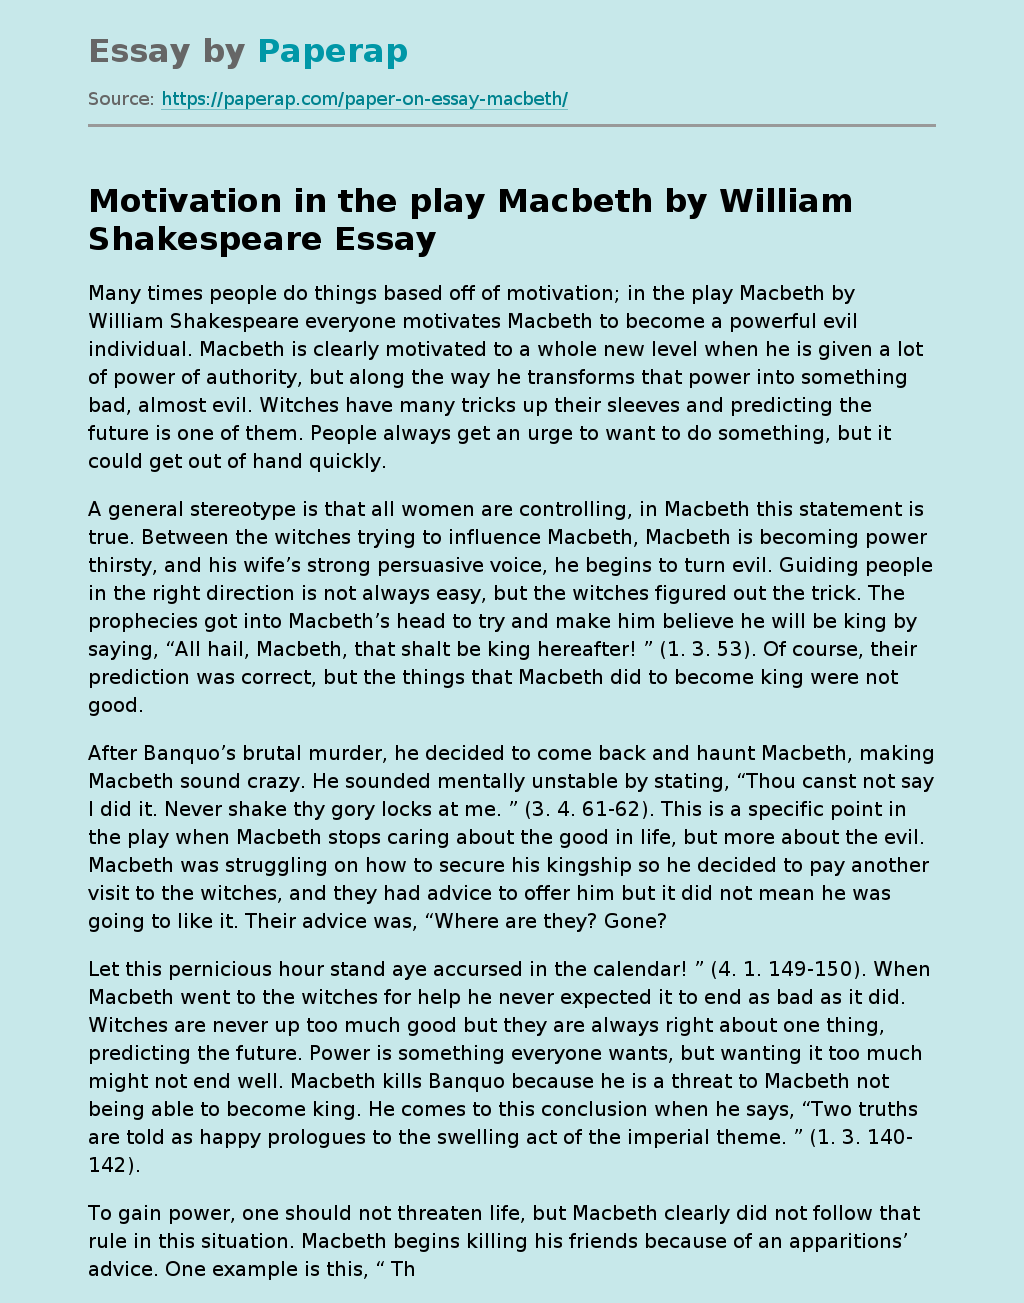 Motivation in the play Macbeth by William Shakespeare